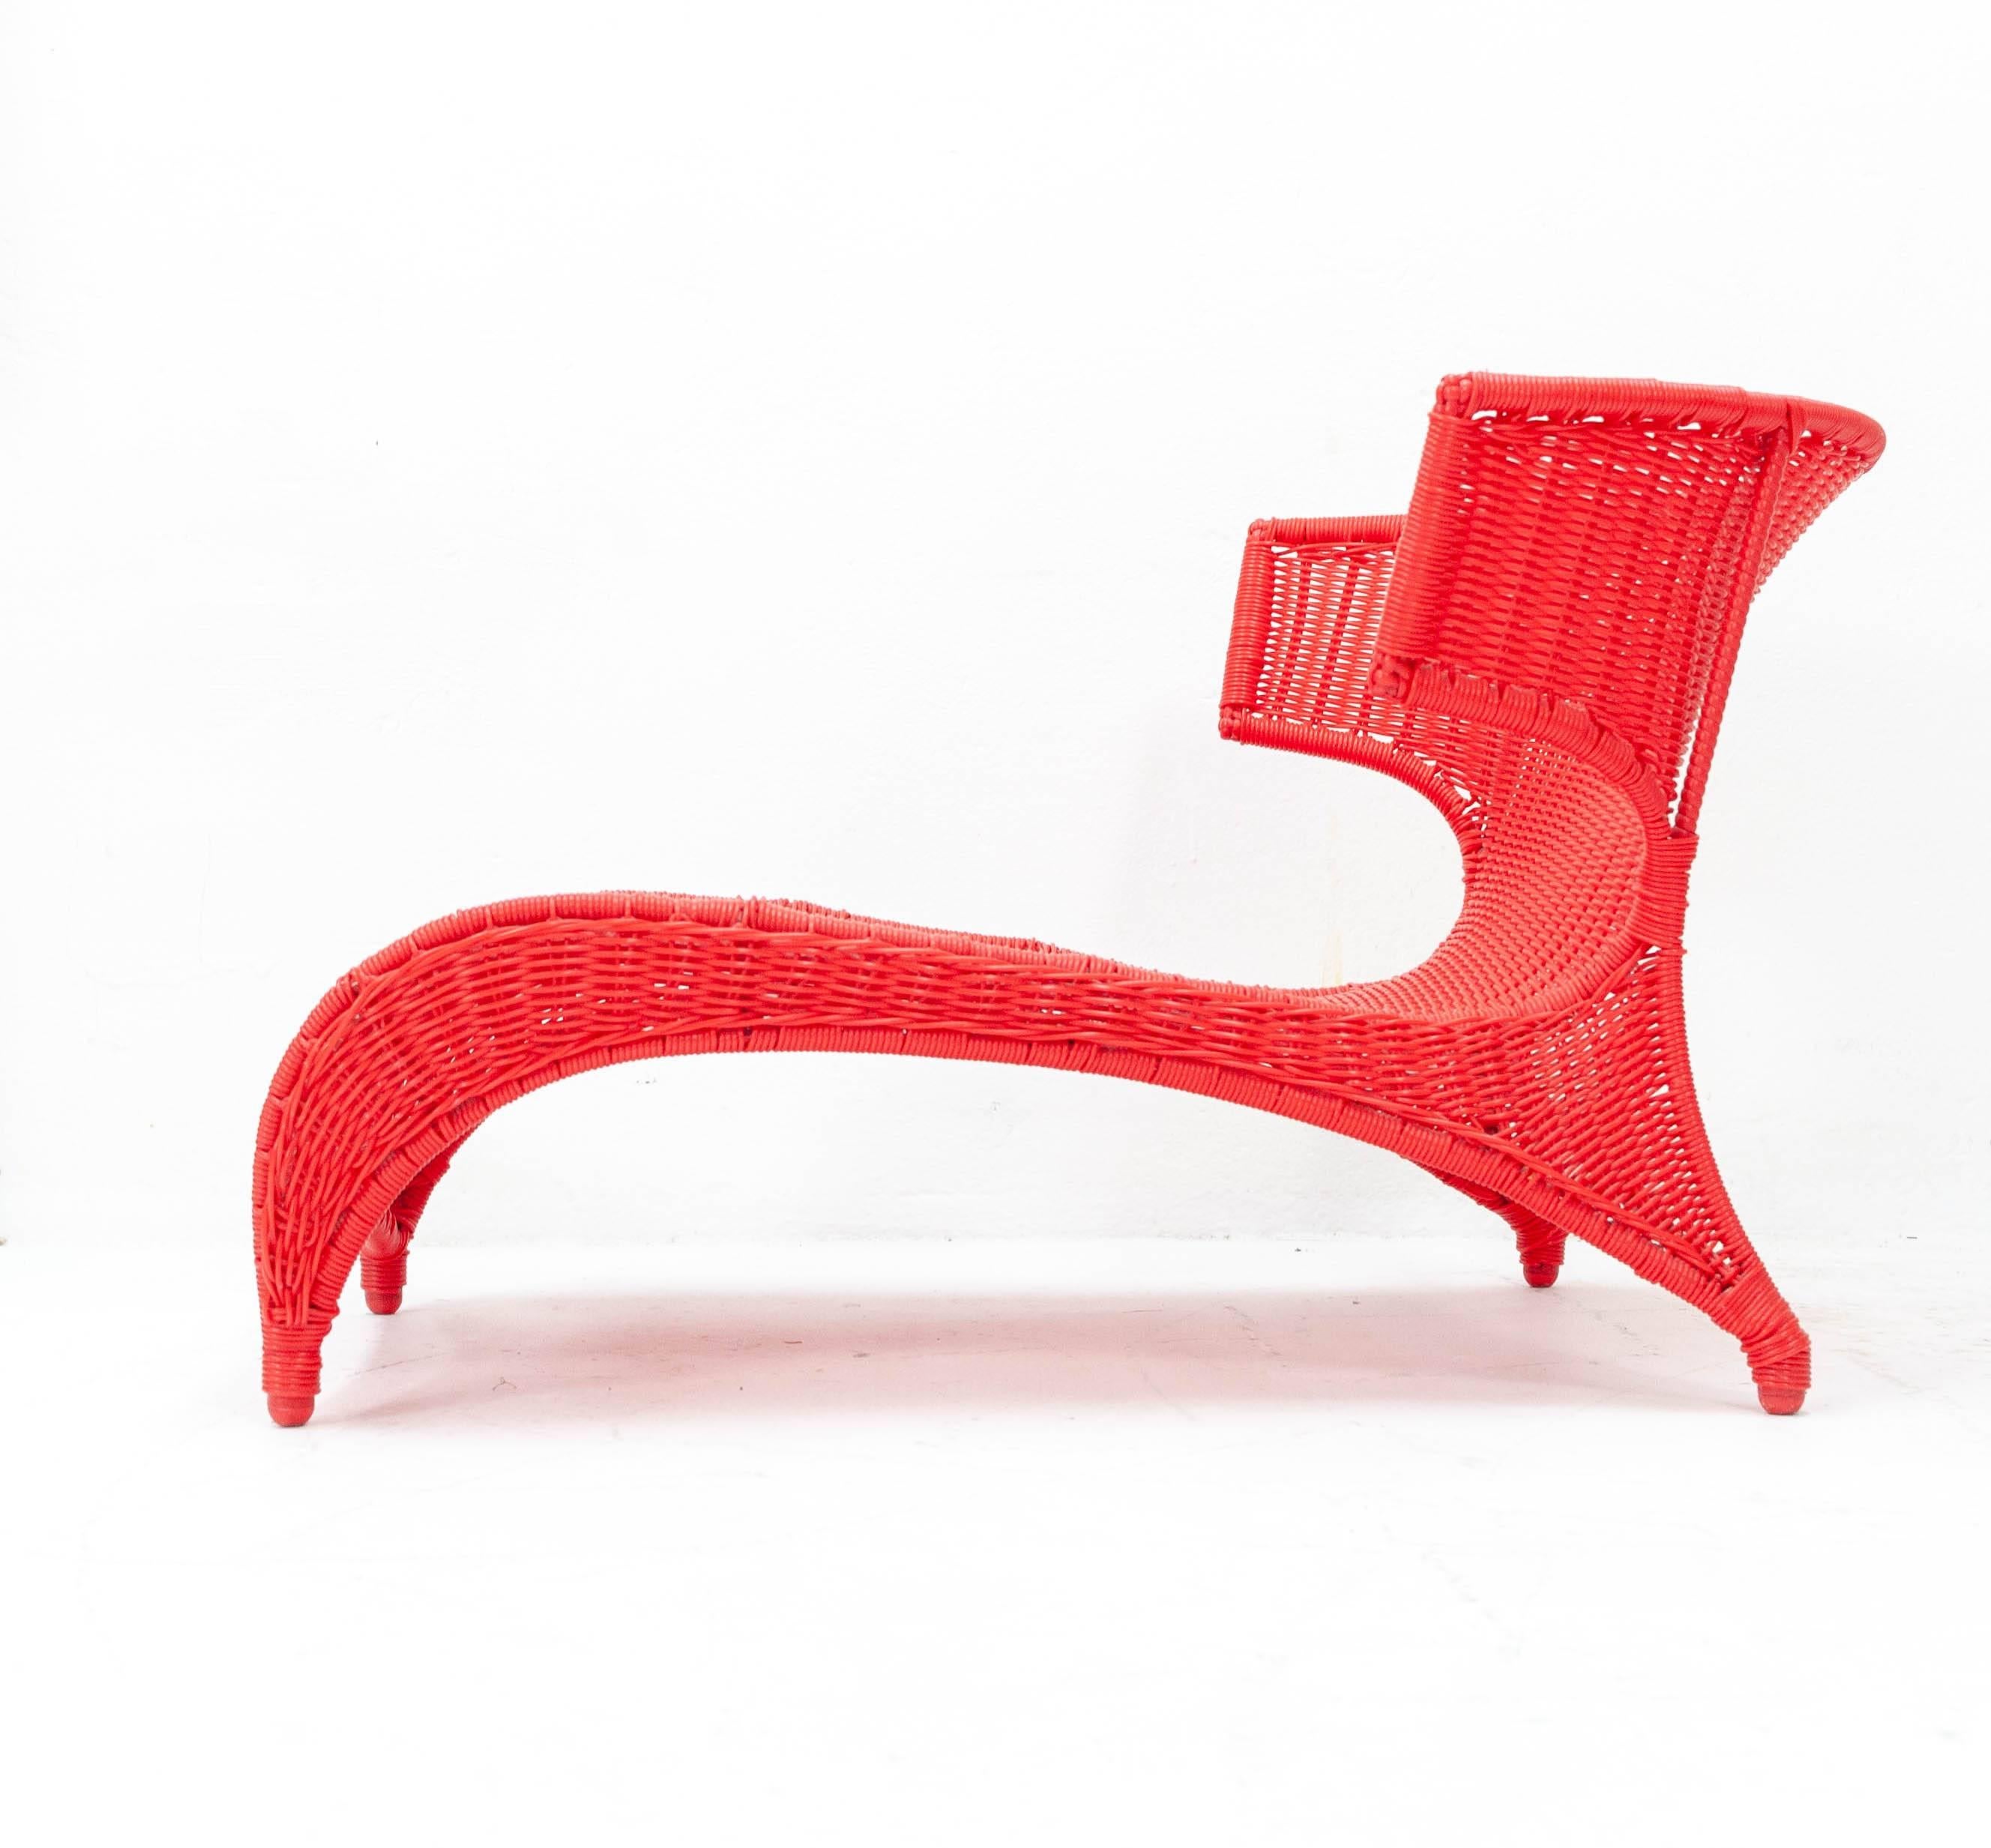 Iconic low-slung indoor or outdoor lounge chair PS Sävö in a dazzling fire engine red. Designed by Monika Mulder for Ikea and built in 2001. A striking and practical piece in very nice condition.